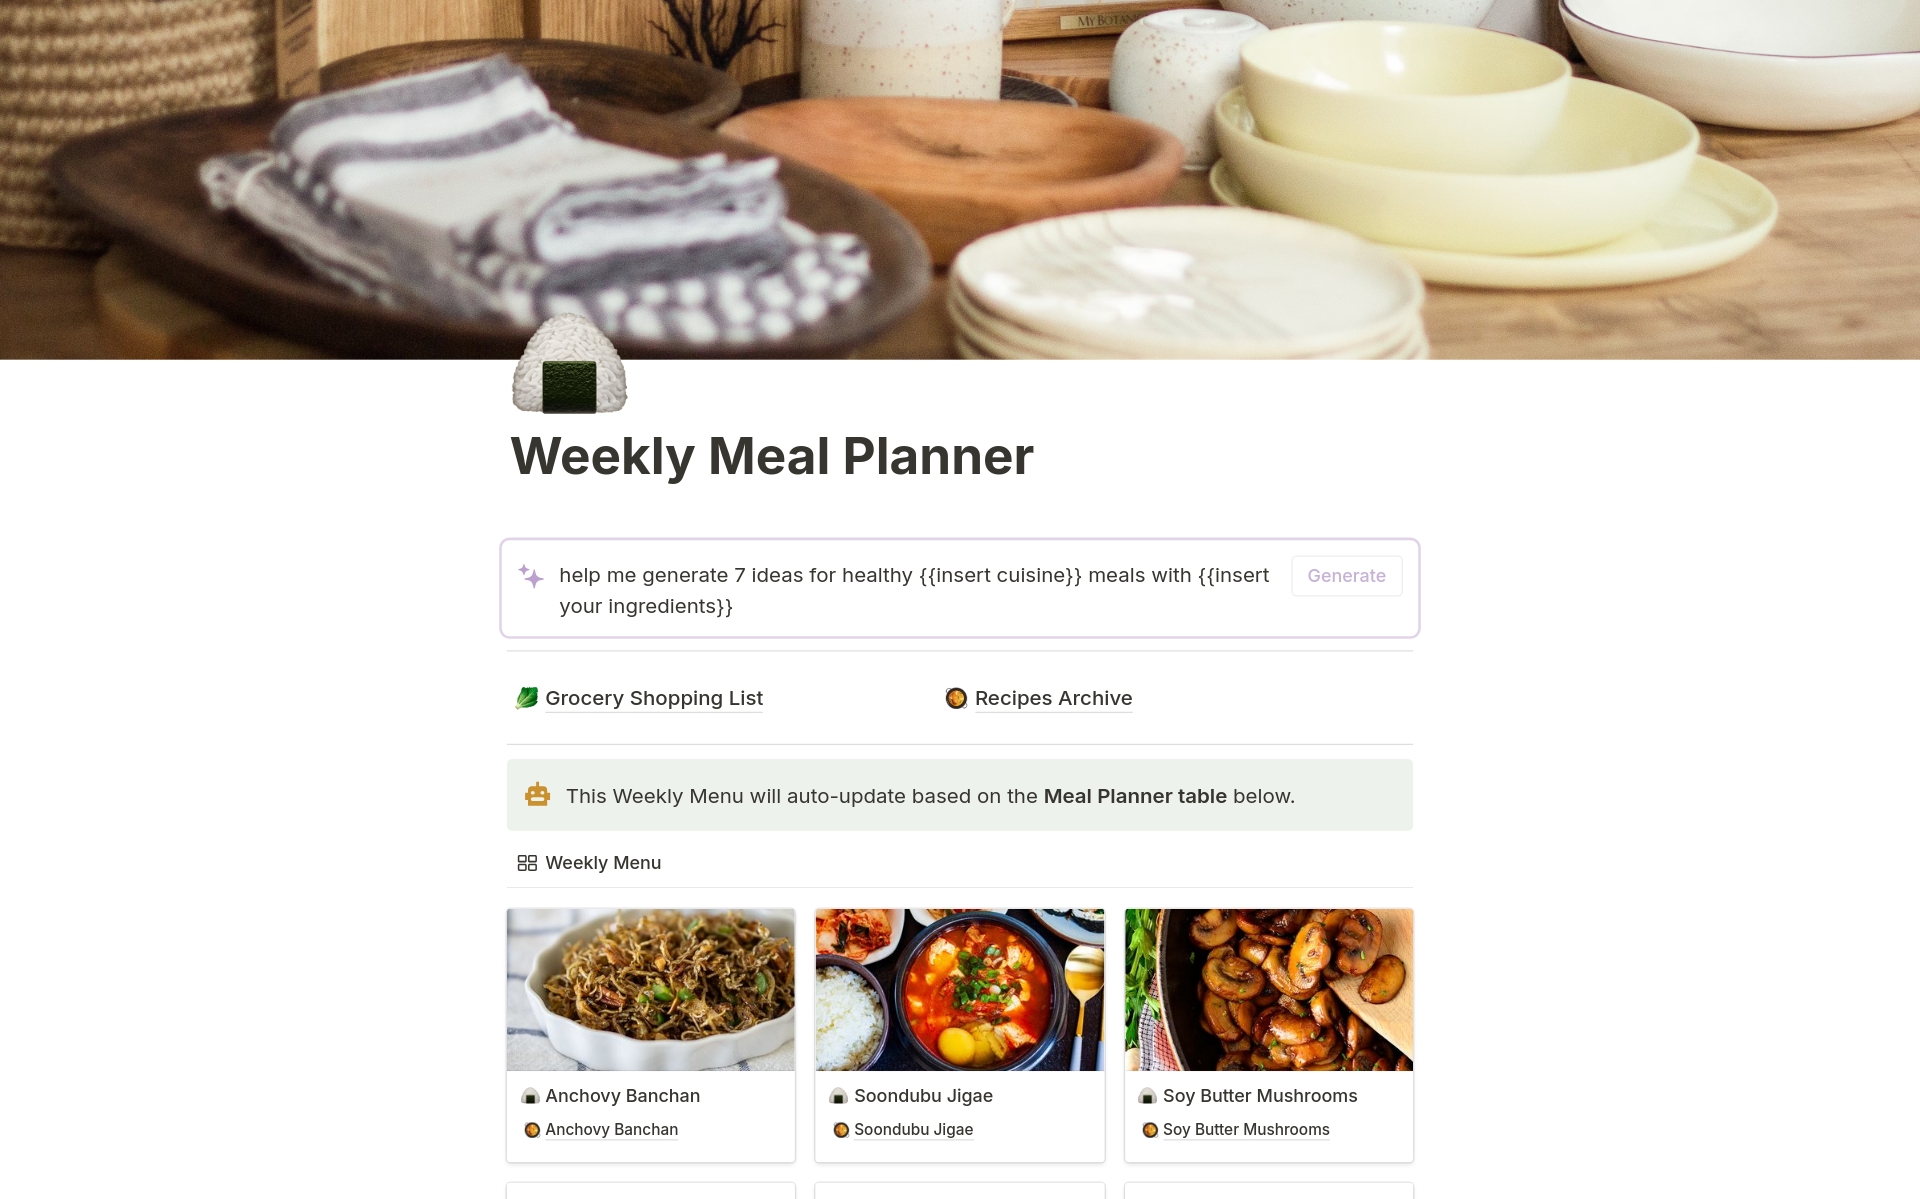 Streamline your meal planning with this template featuring AI and automations! Effortlessly plan your weekly meals, and watch as ingredients are automatically added to your grocery list and recipes are archived for future use. 